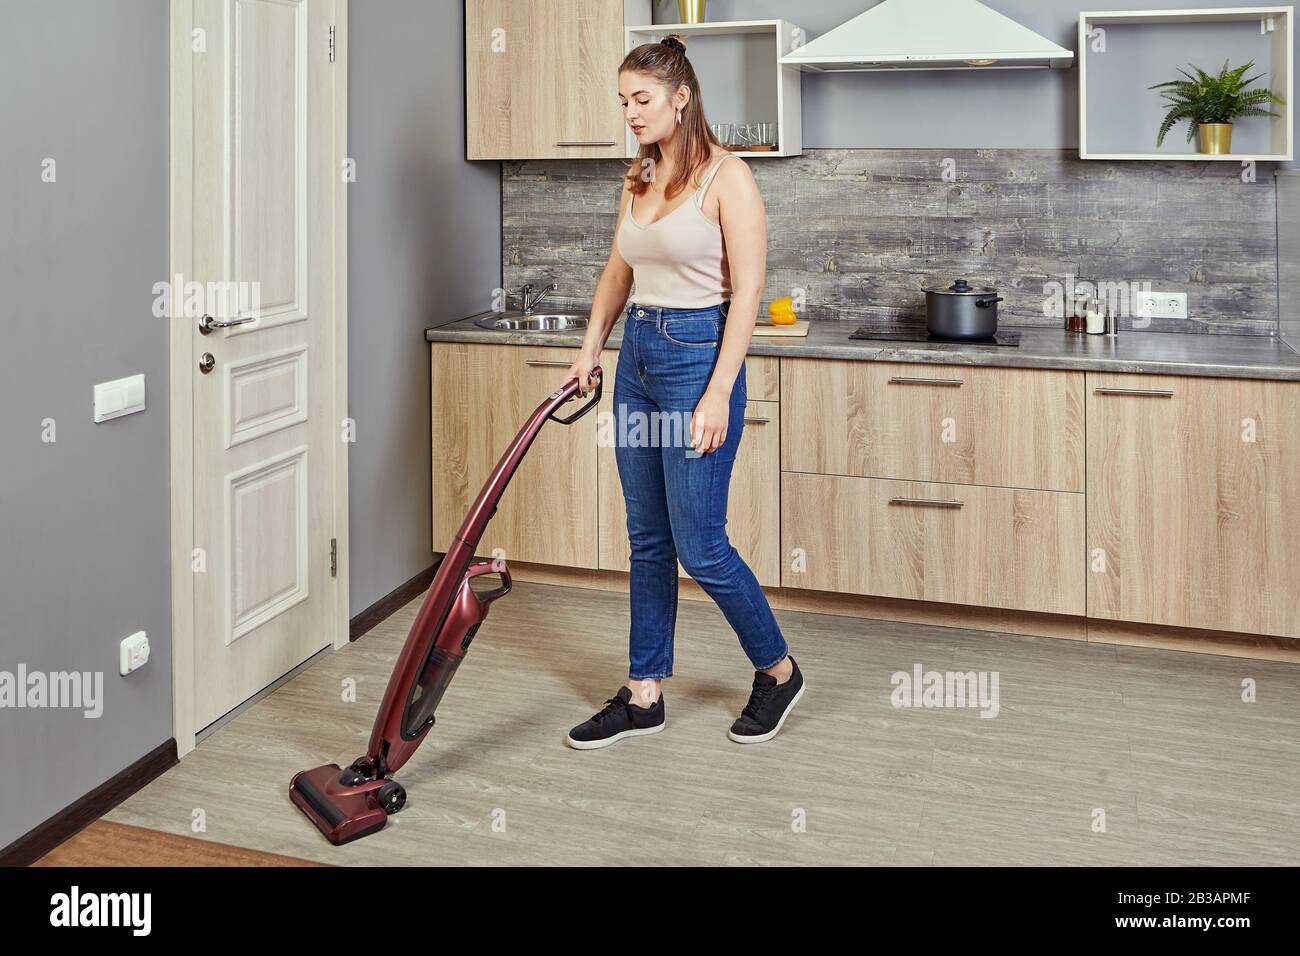 https://c8.alamy.com/comp/2B3APMF/a-young-caucasian-woman-vacuums-a-kitchen-floor-using-a-cordless-vertical-vacuum-cleaner-or-electric-broom-the-maid-is-cleaning-up-the-hostels-cook-2B3APMF.jpg